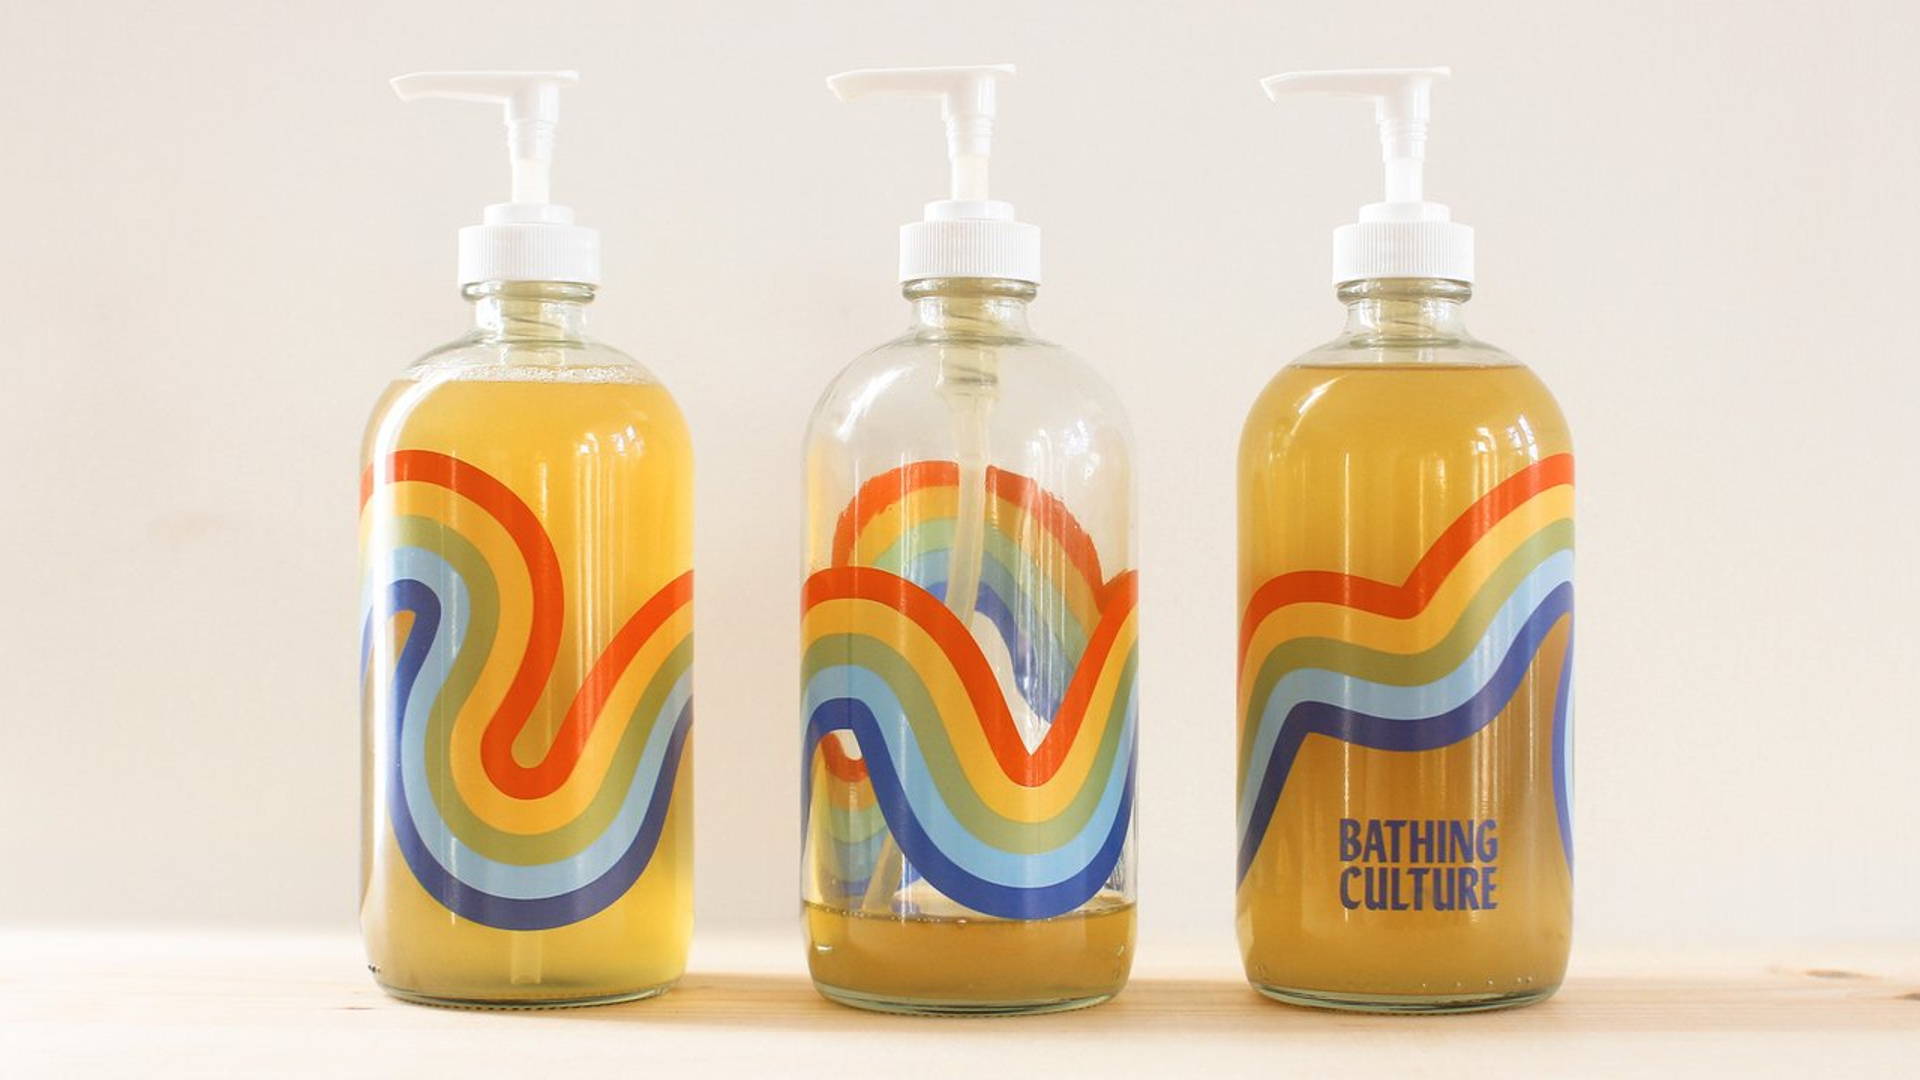 Bathing Culture Elevates The Daily Ritual Of Getting Clean | Dieline -  Design, Branding & Packaging Inspiration